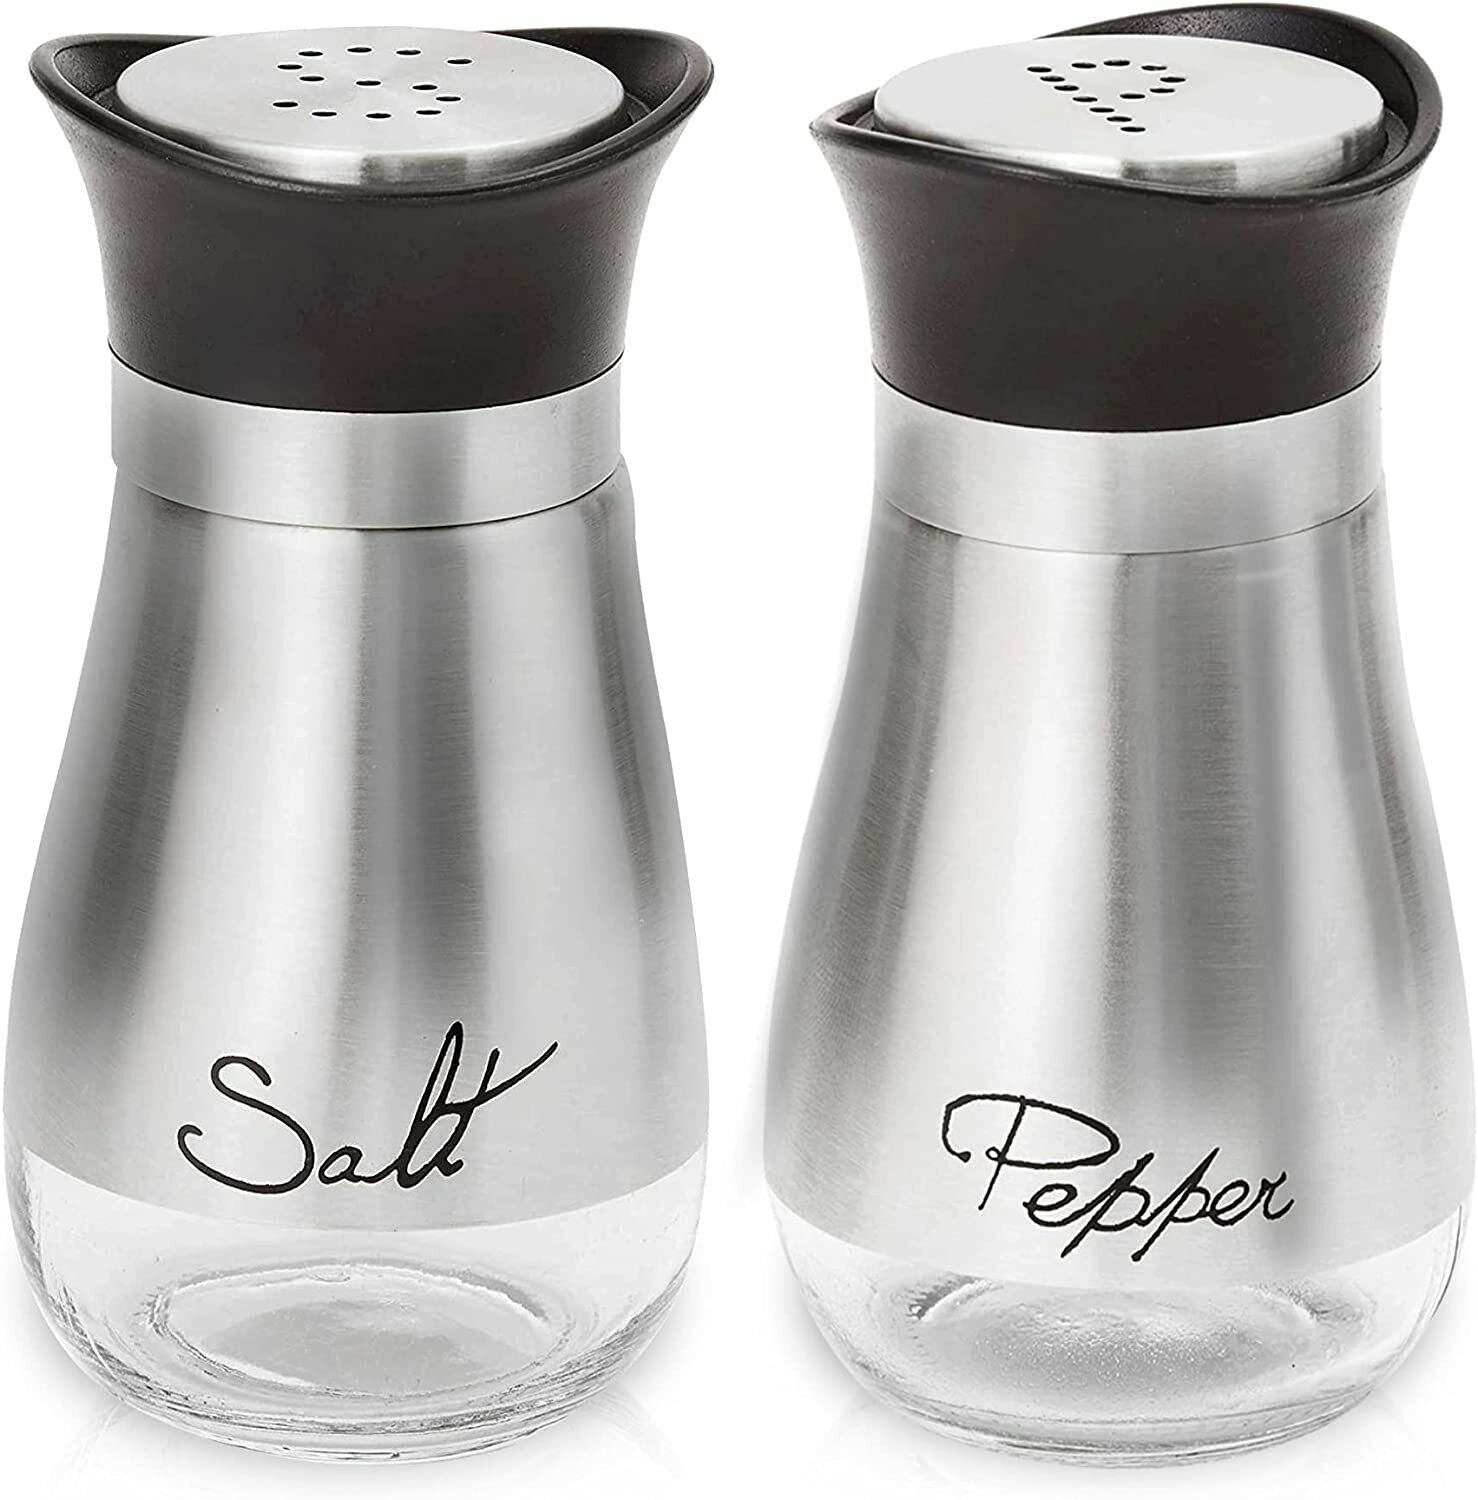 Exquisite BPA Free Salt and Pepper Shakers Stainless Steel Glass Set, 4oz